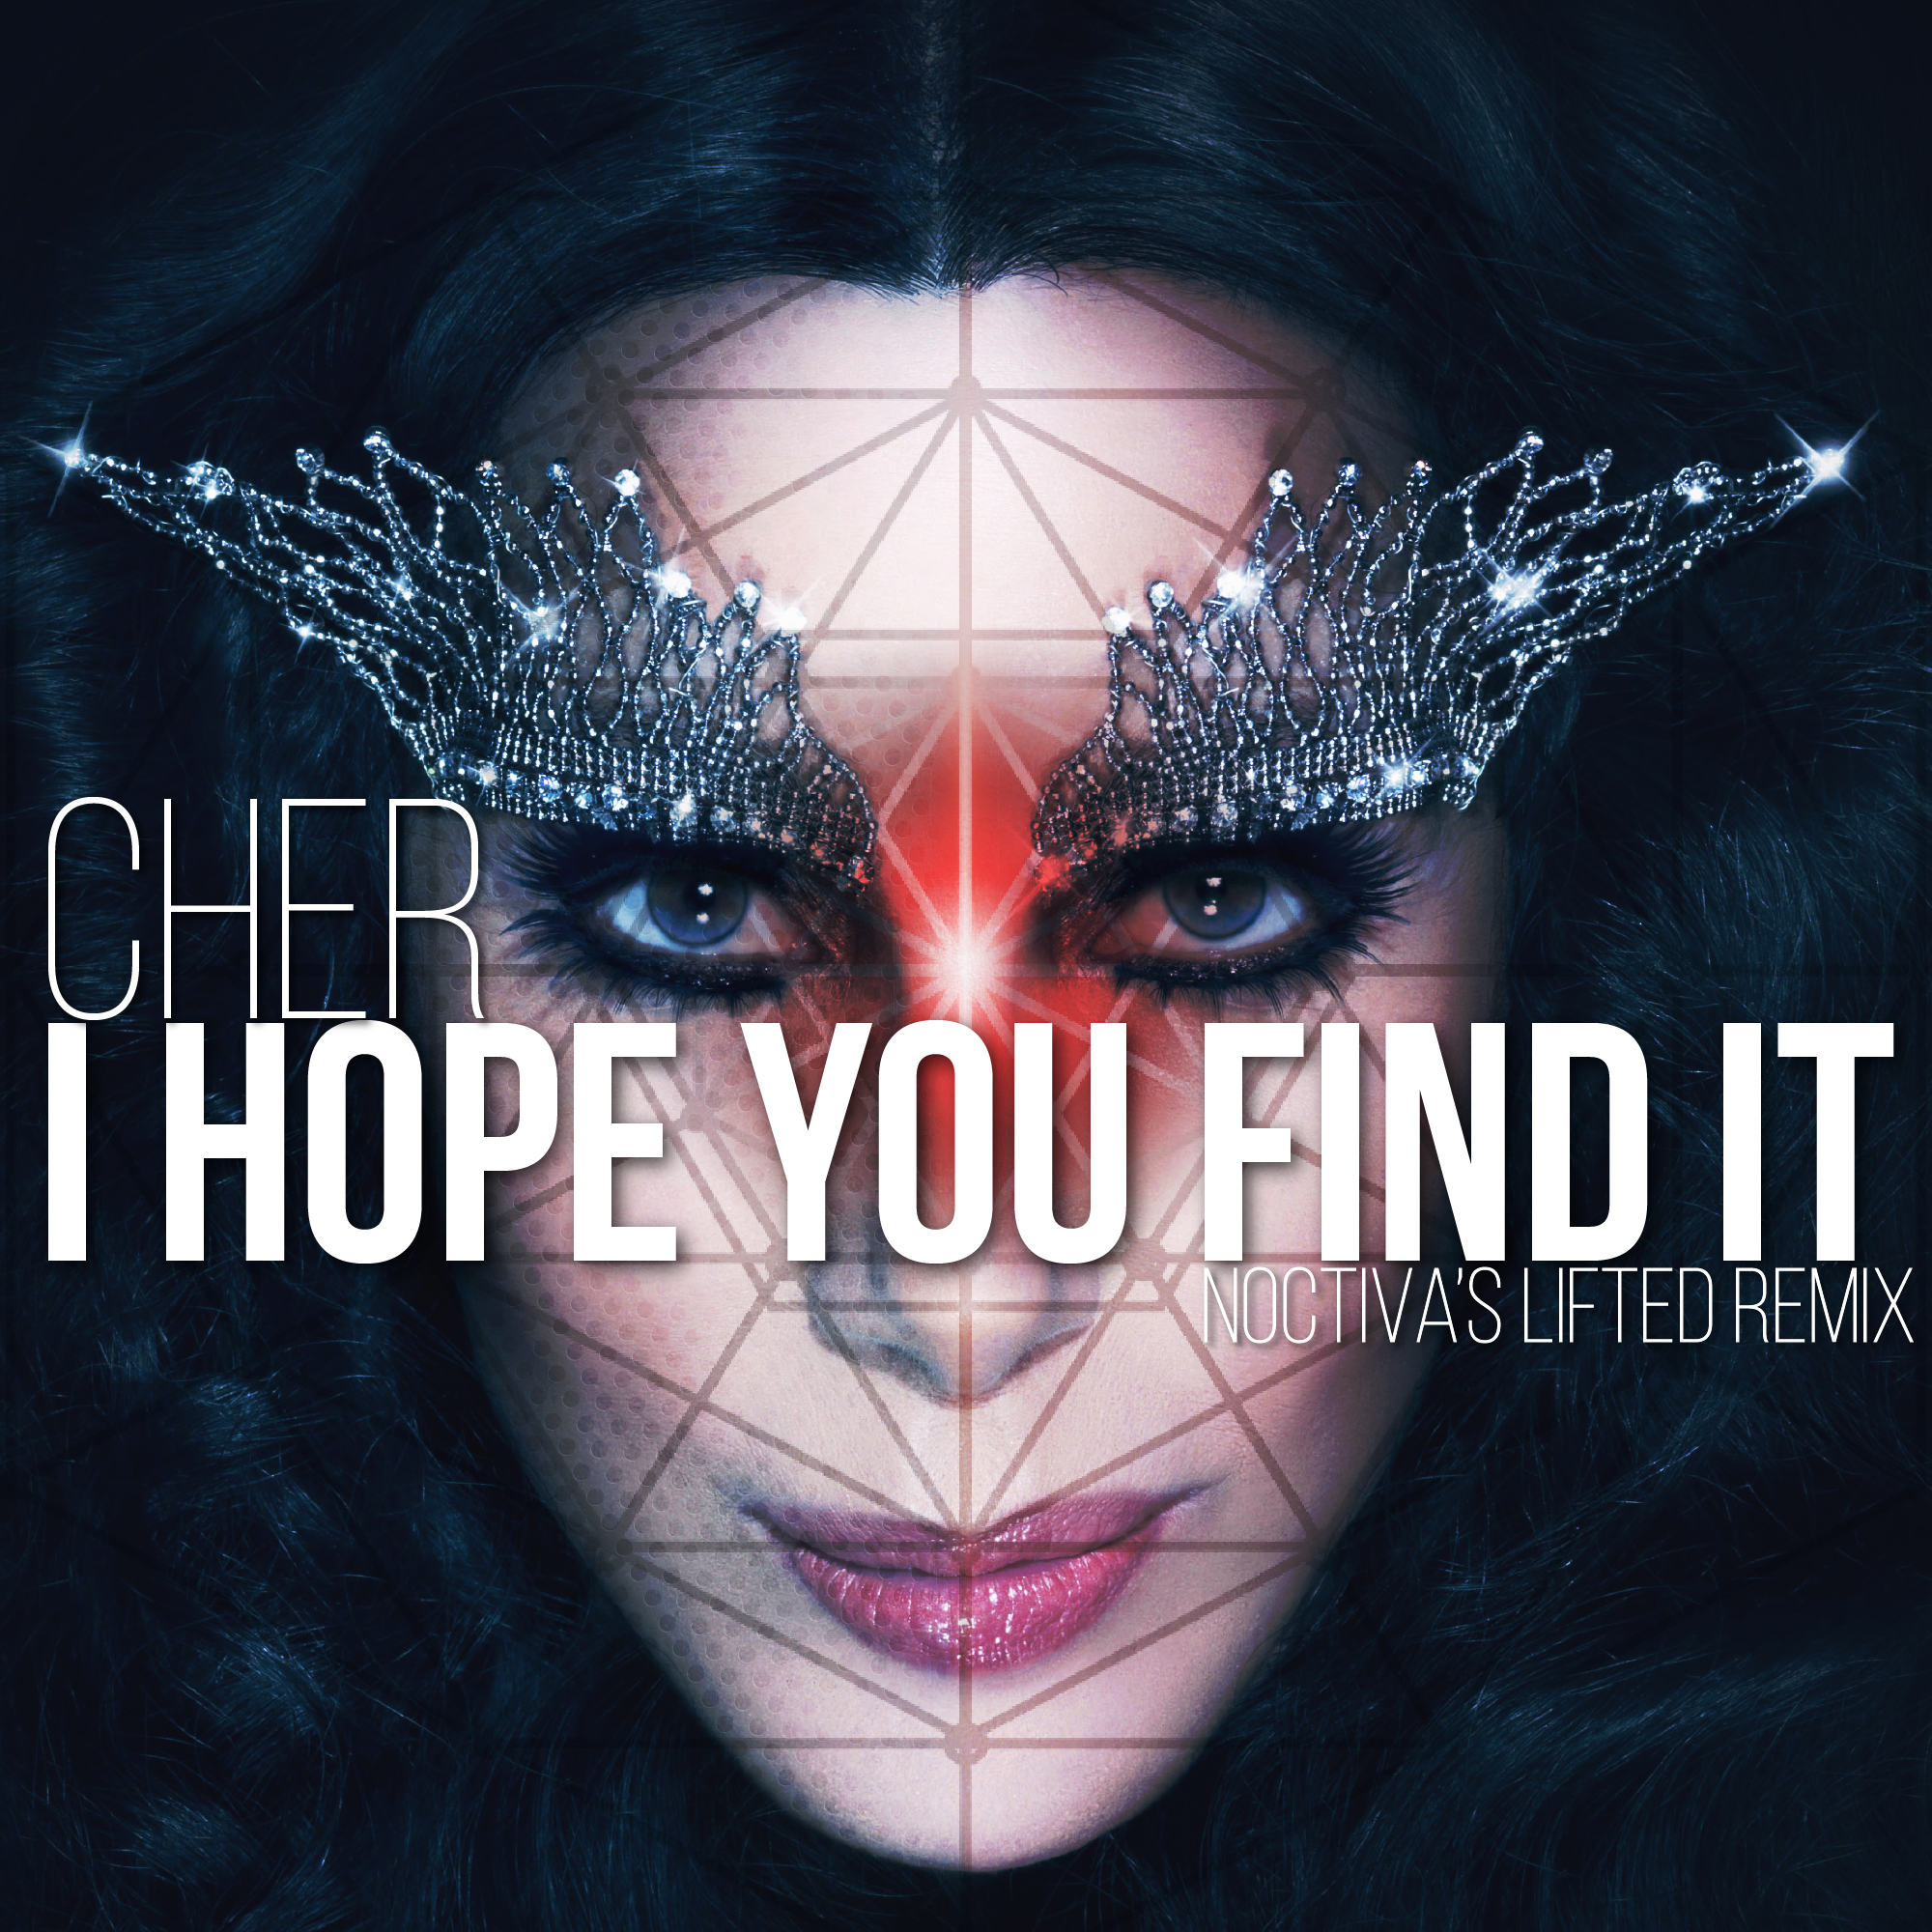 I Hope You Find It (Noctiva's lifted Remix) – Cher